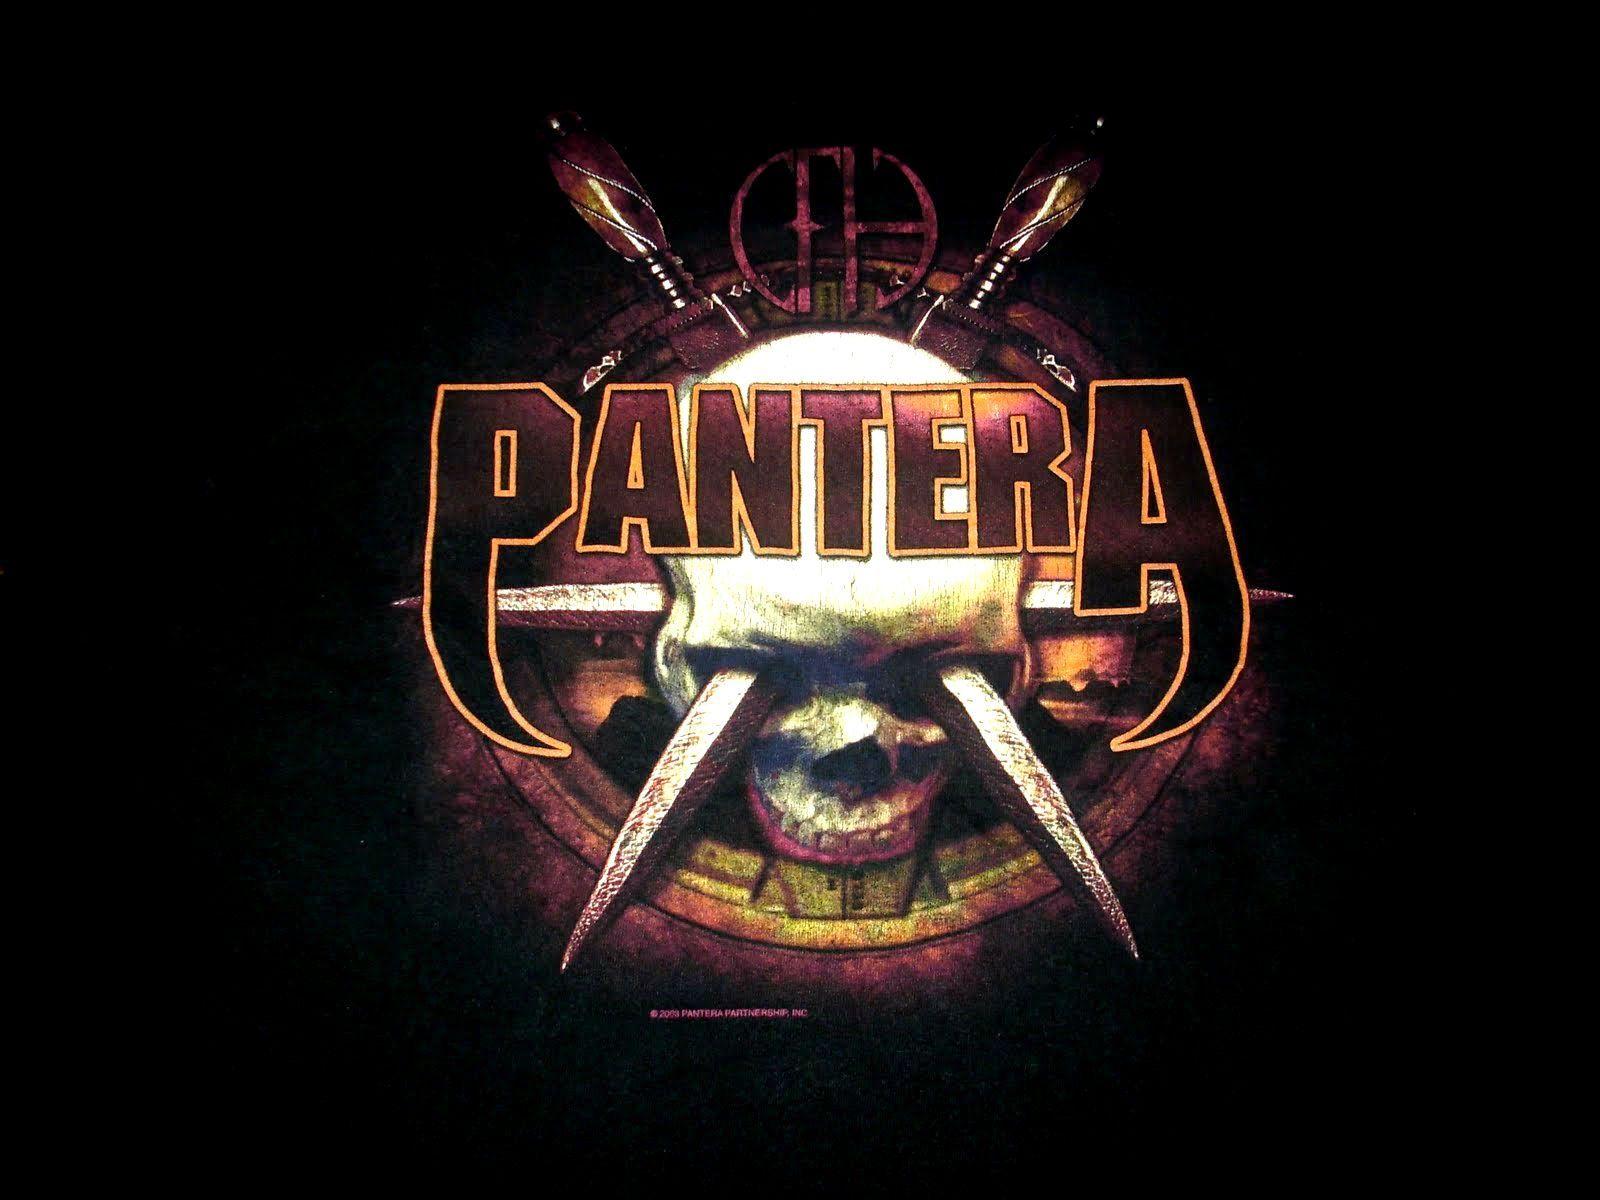 Pantera Logo 37097 Kb Uploaded By Papperopenna Inconvenientig